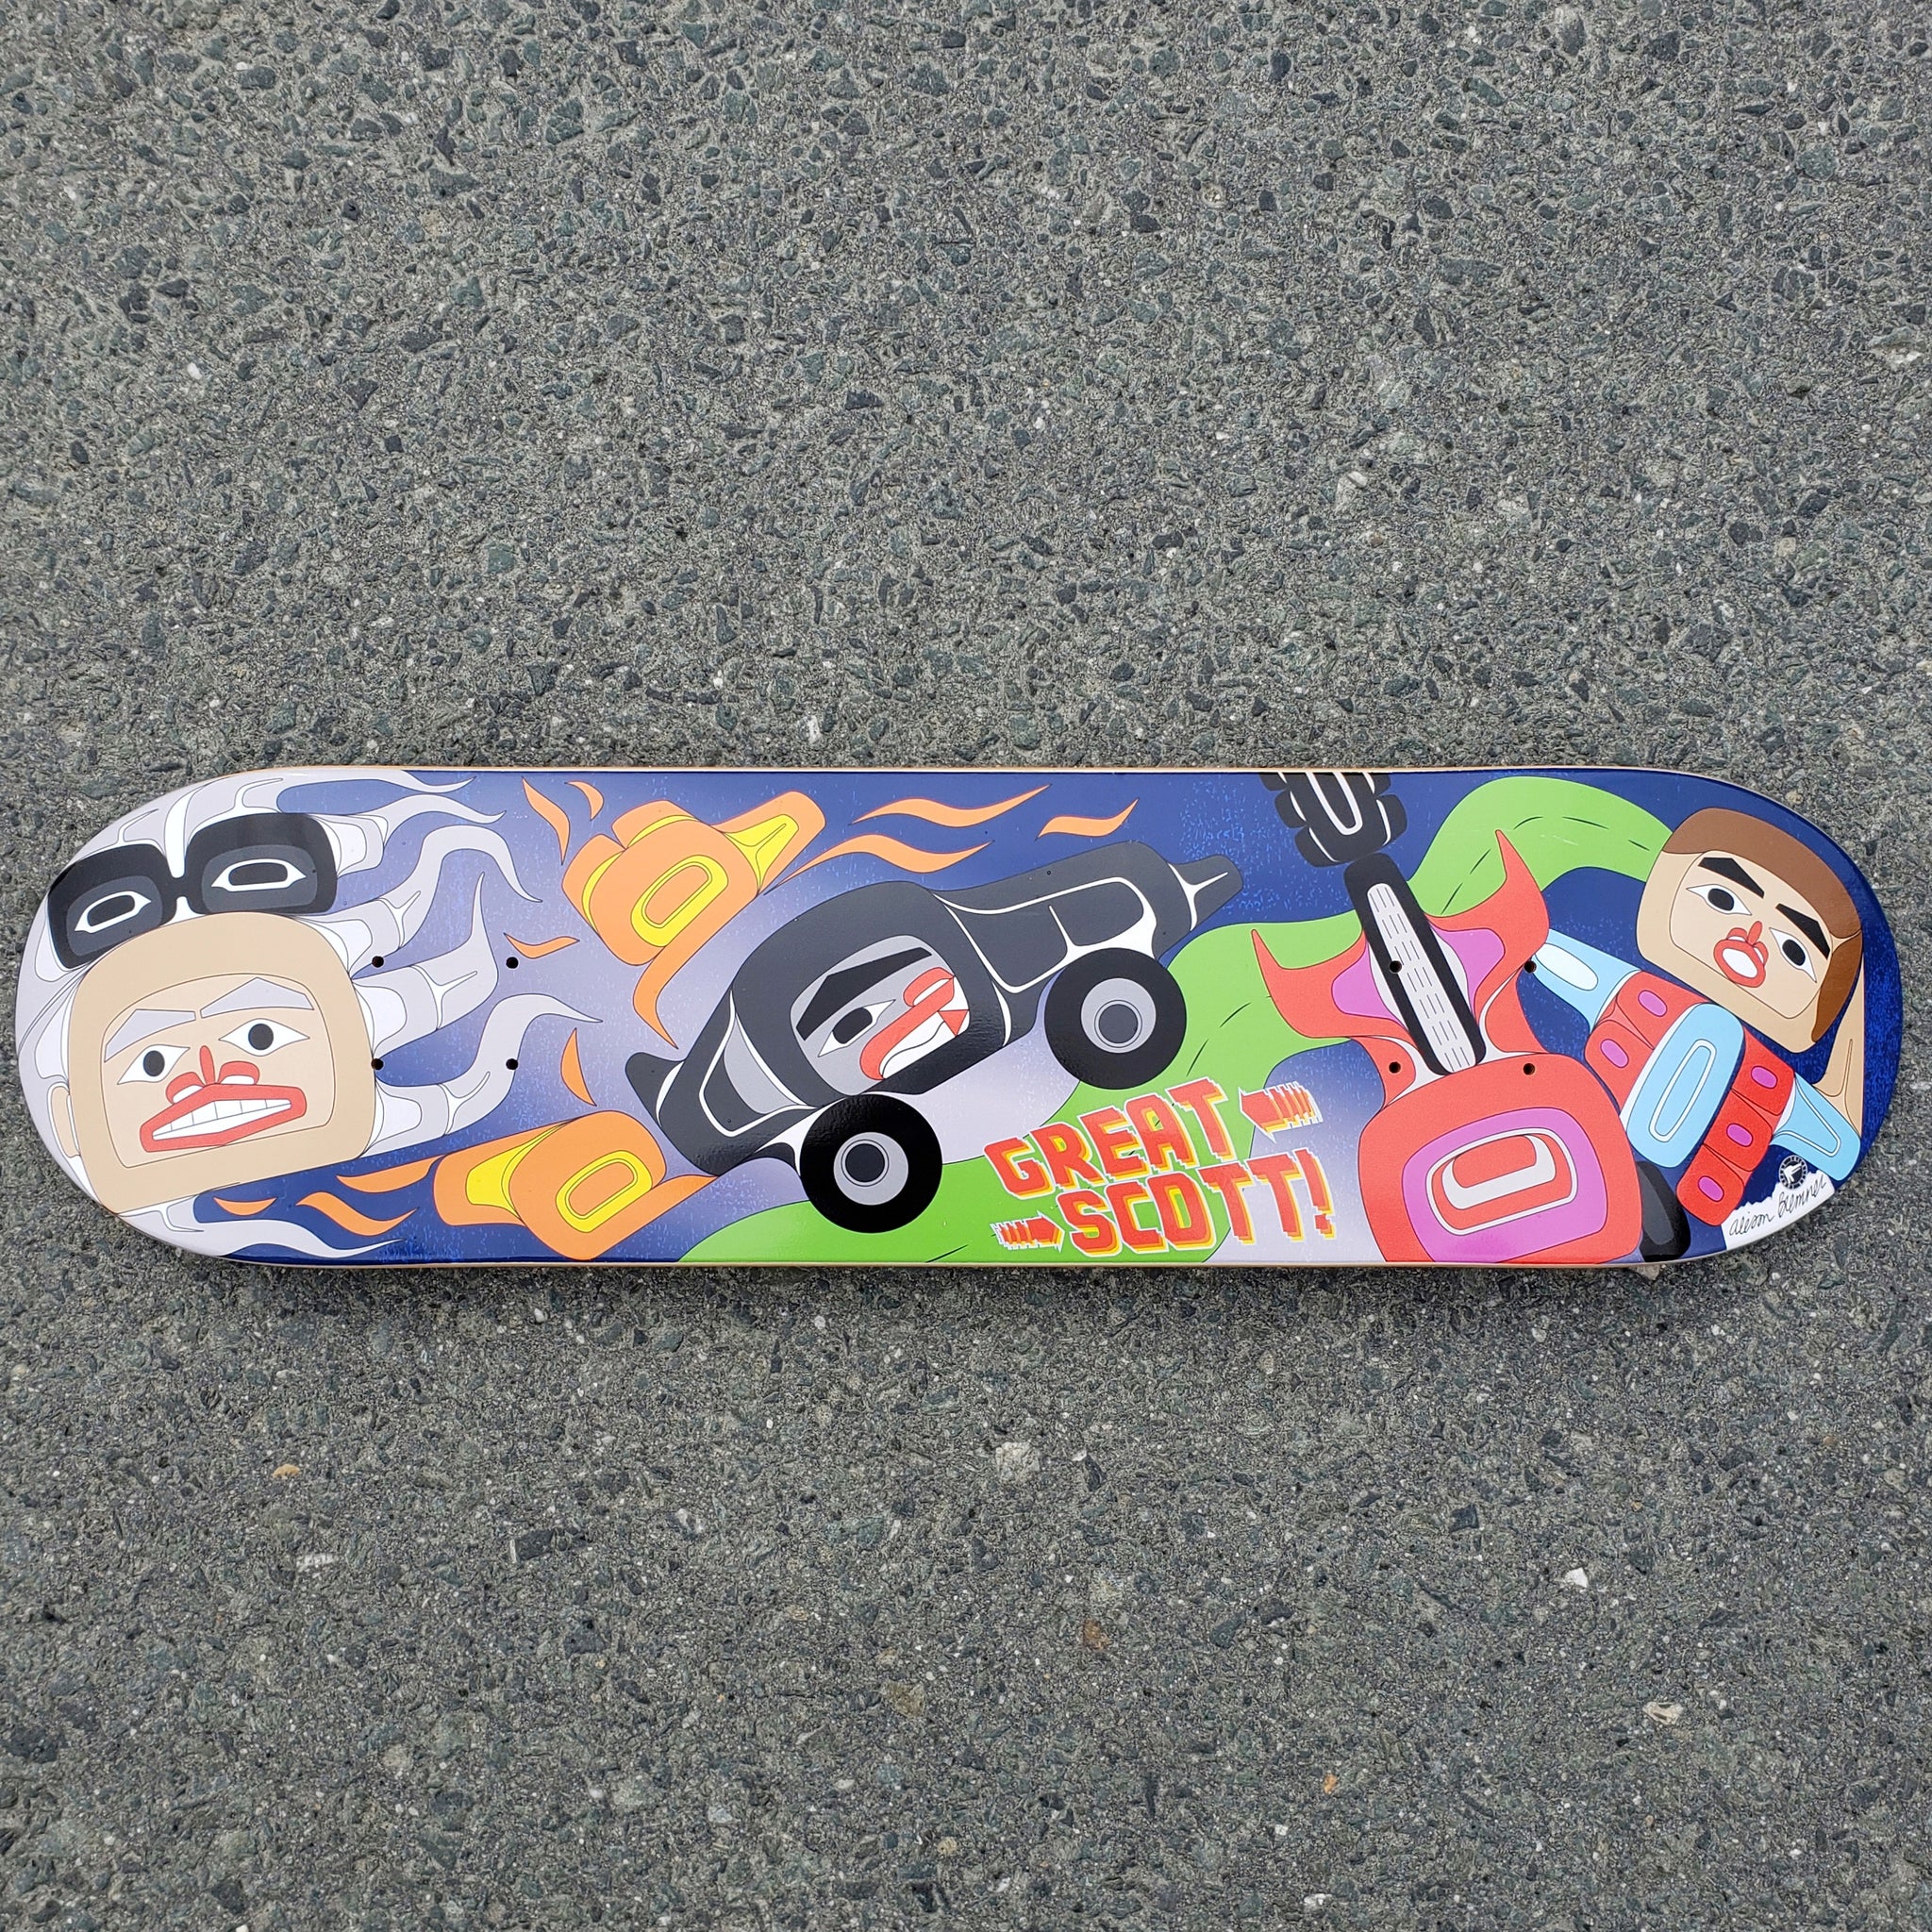 McFly Skateboard (LIMITED PRODUCTION 75 UNITS ONLY)